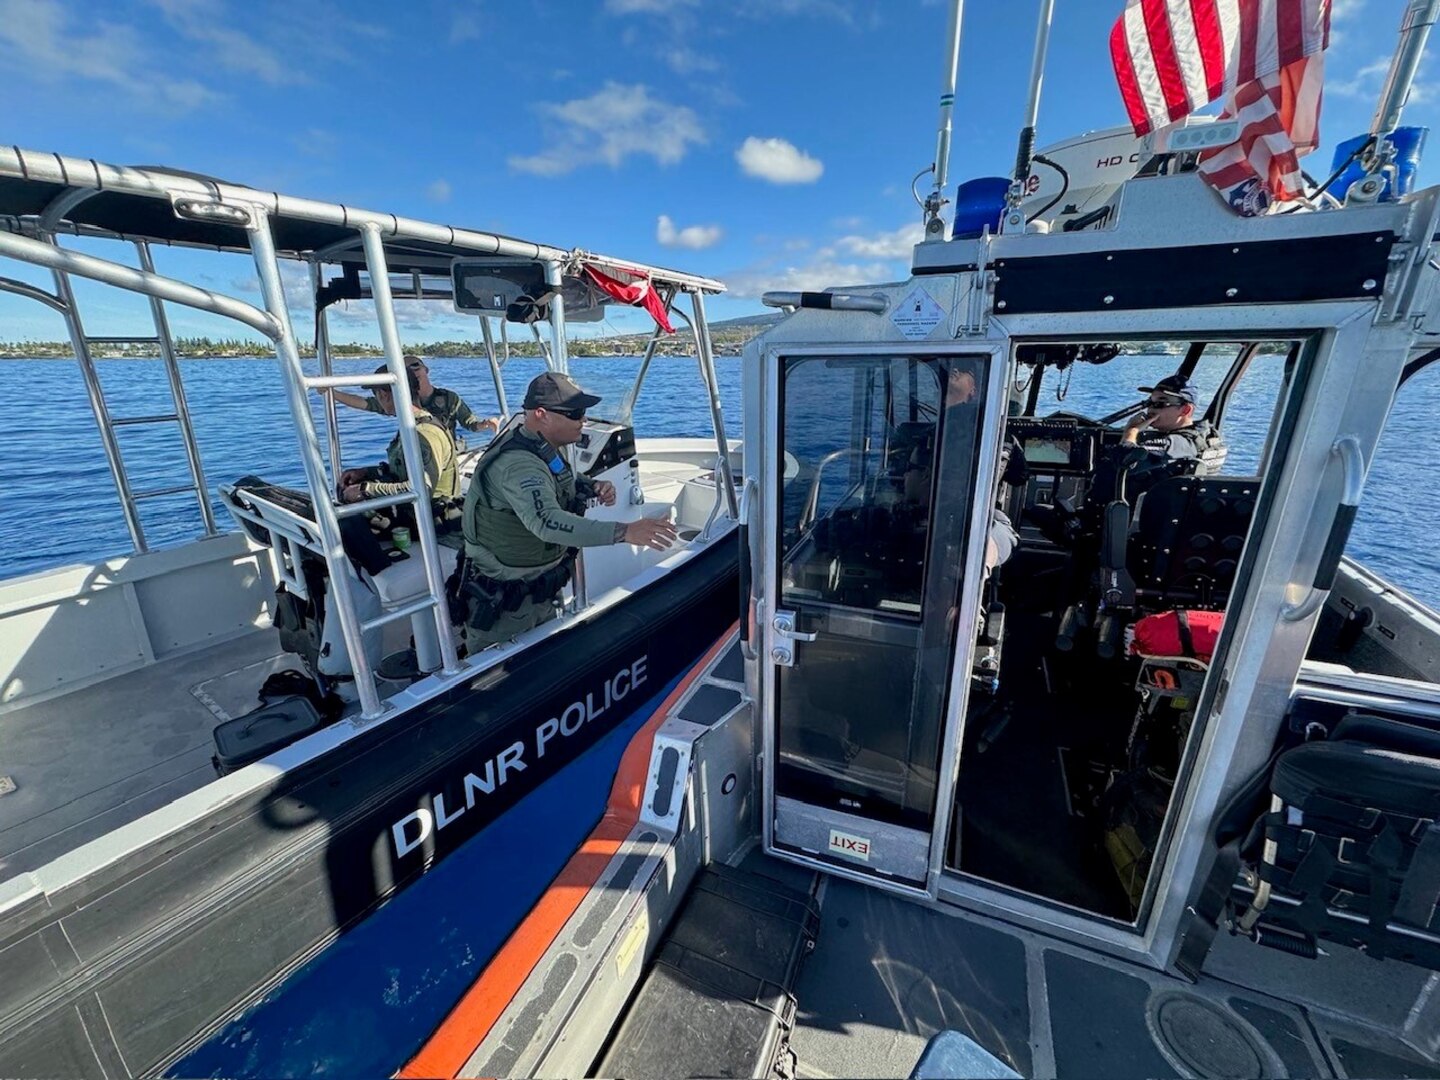 The U.S. Coast Guard completed Operation Koa Kai, a comprehensive month-long maritime security and safety operation conducted throughout October off the Island of Hawaii. Operation Koa Kai reflects the Coast Guard's mission to protect and serve the maritime community, ensuring the smooth flow of commerce, maintaining maritime safety, and responding promptly to emergencies.